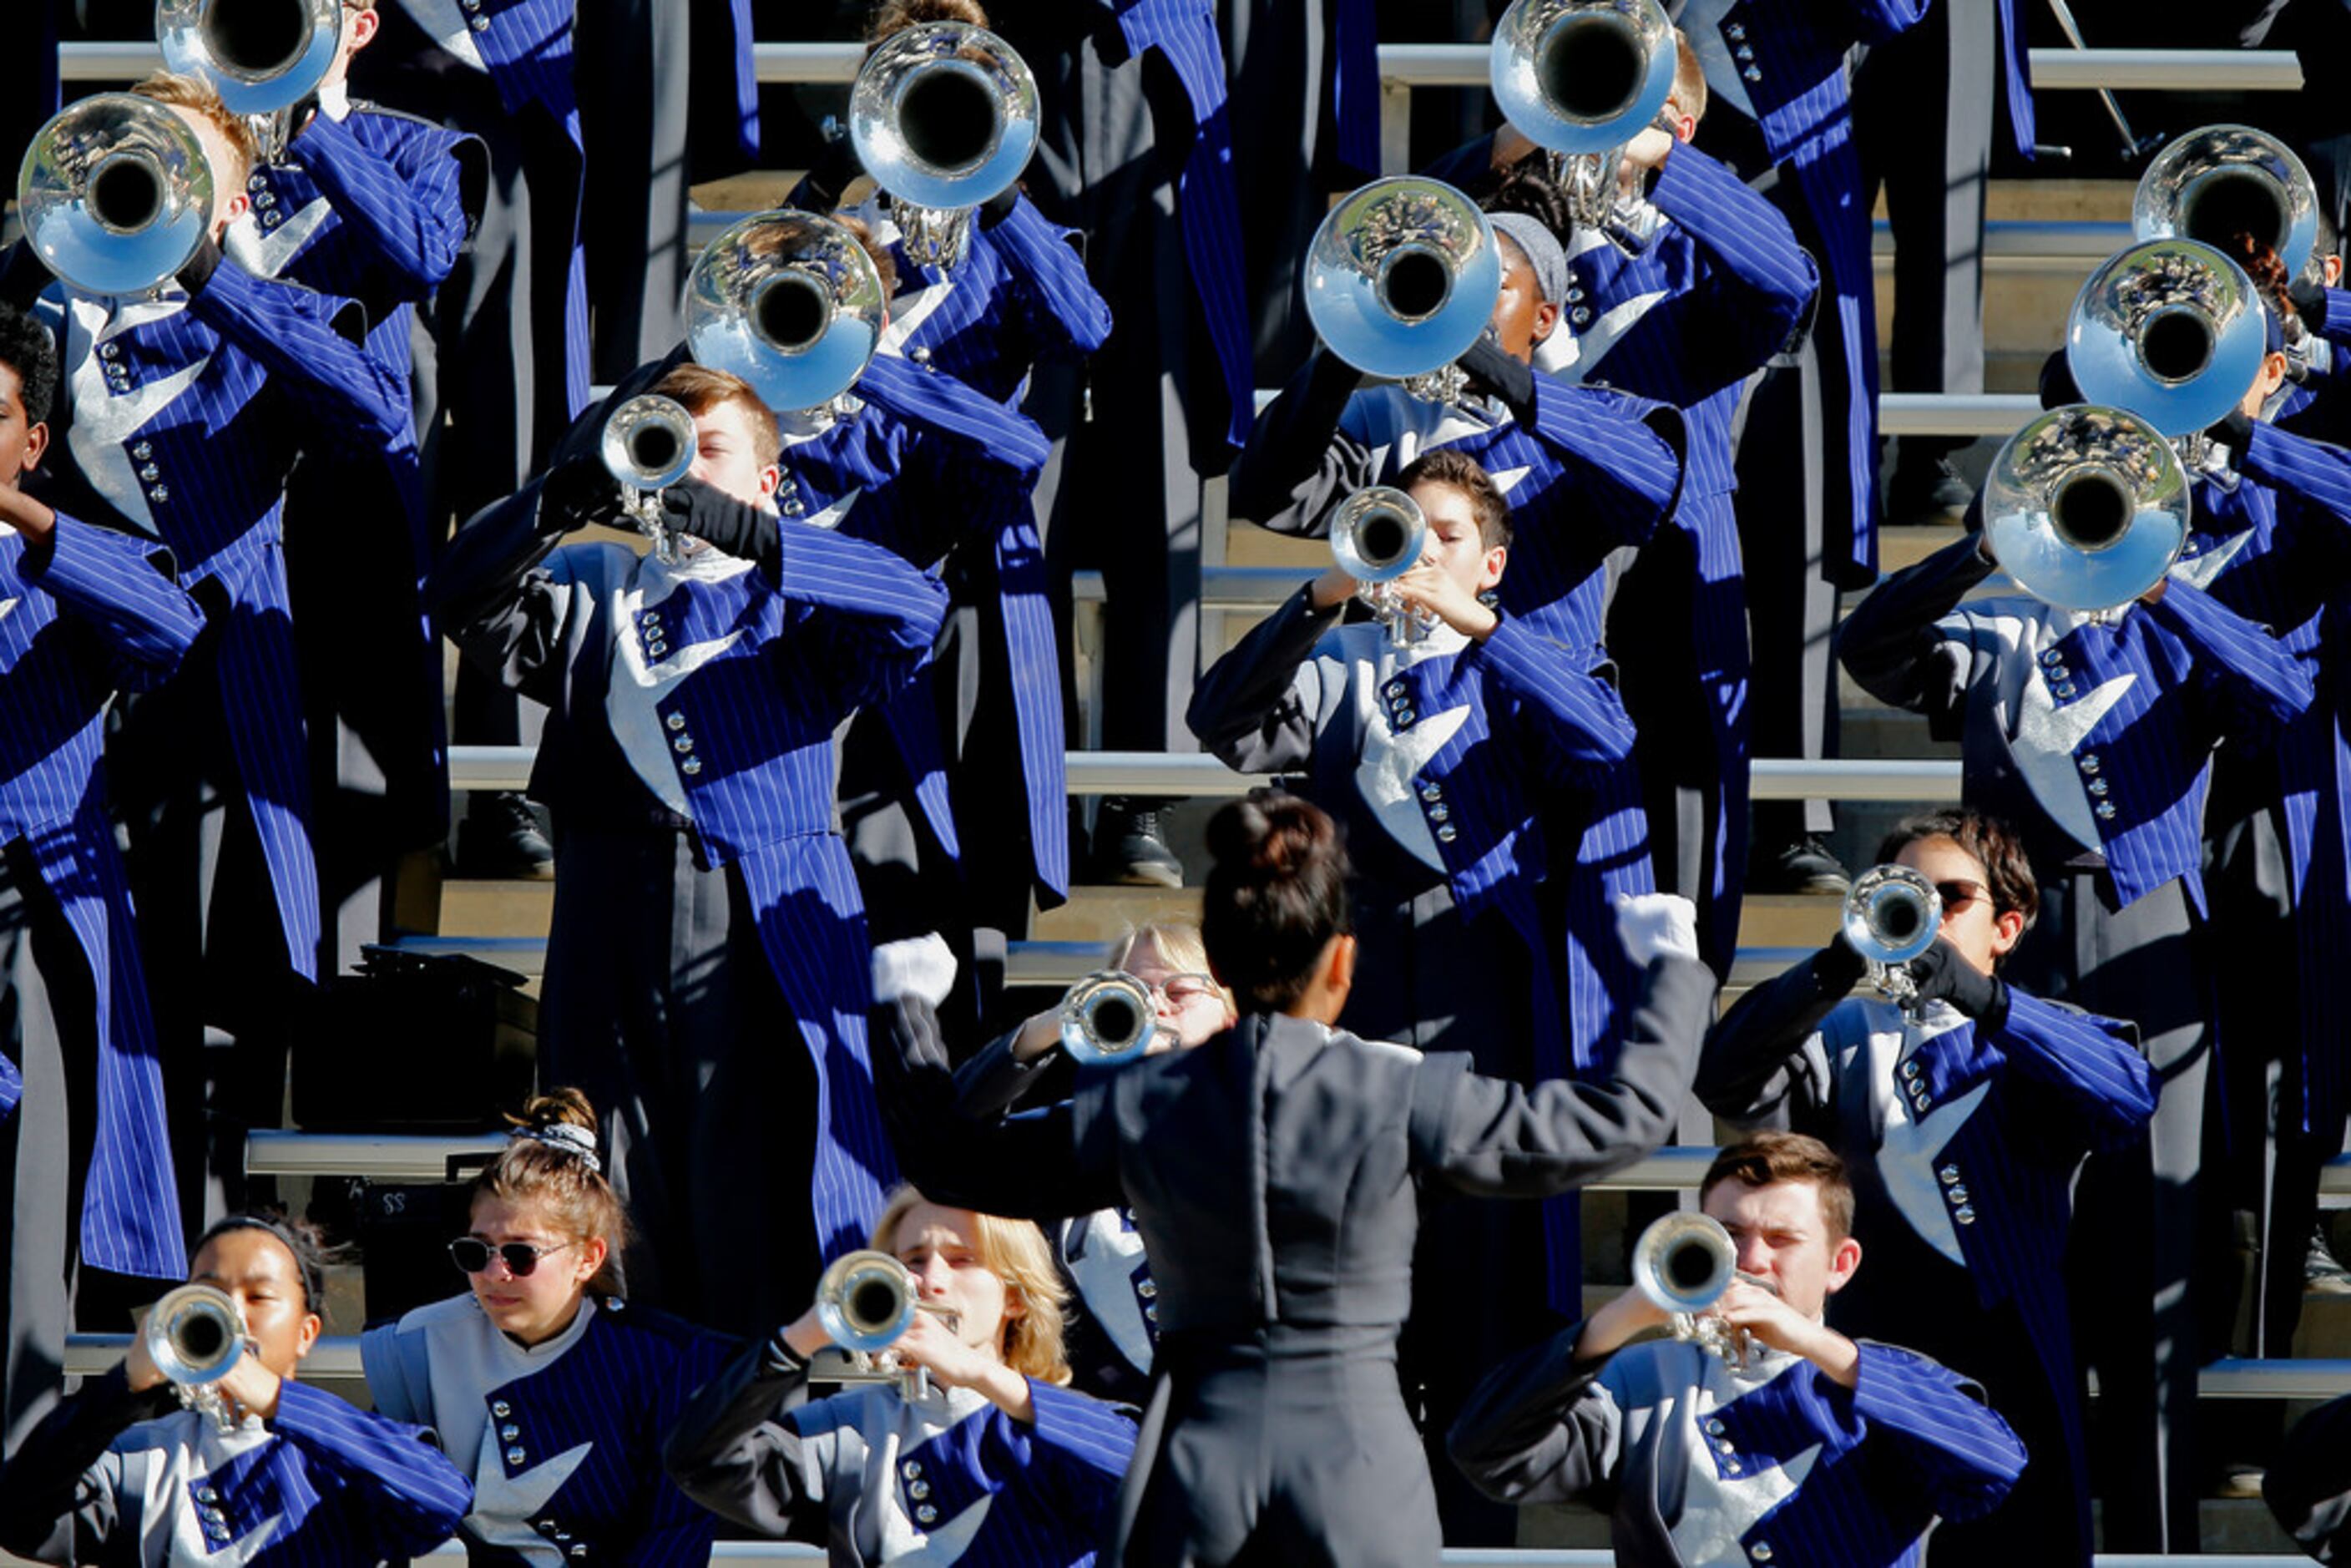 The Lone Star High School marching band performs before kickoff as Frisco Lone Star High...